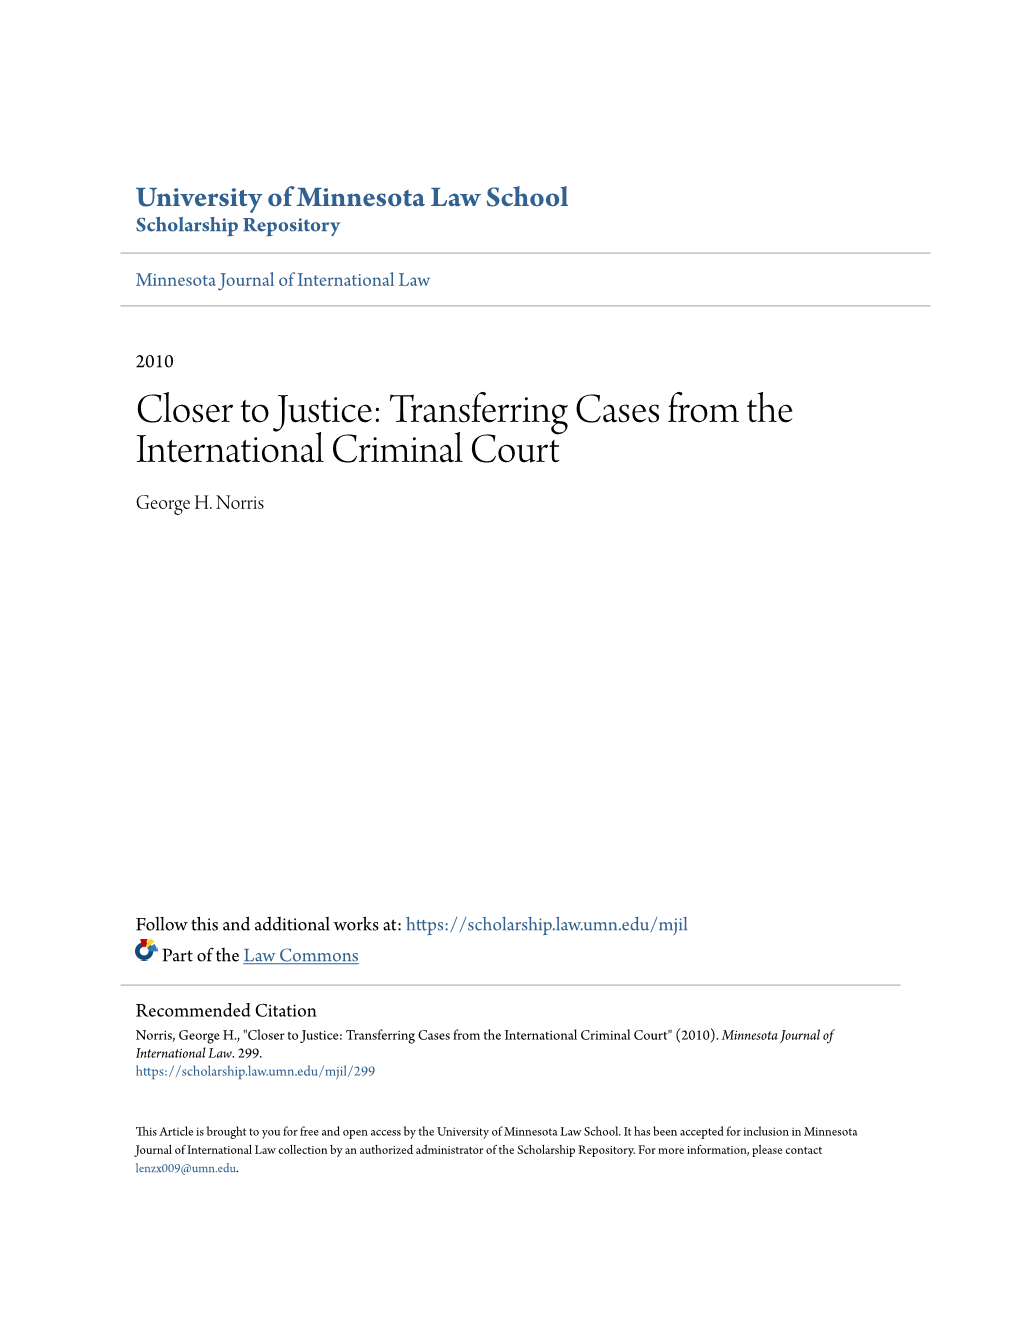 Closer to Justice: Transferring Cases from the International Criminal Court George H